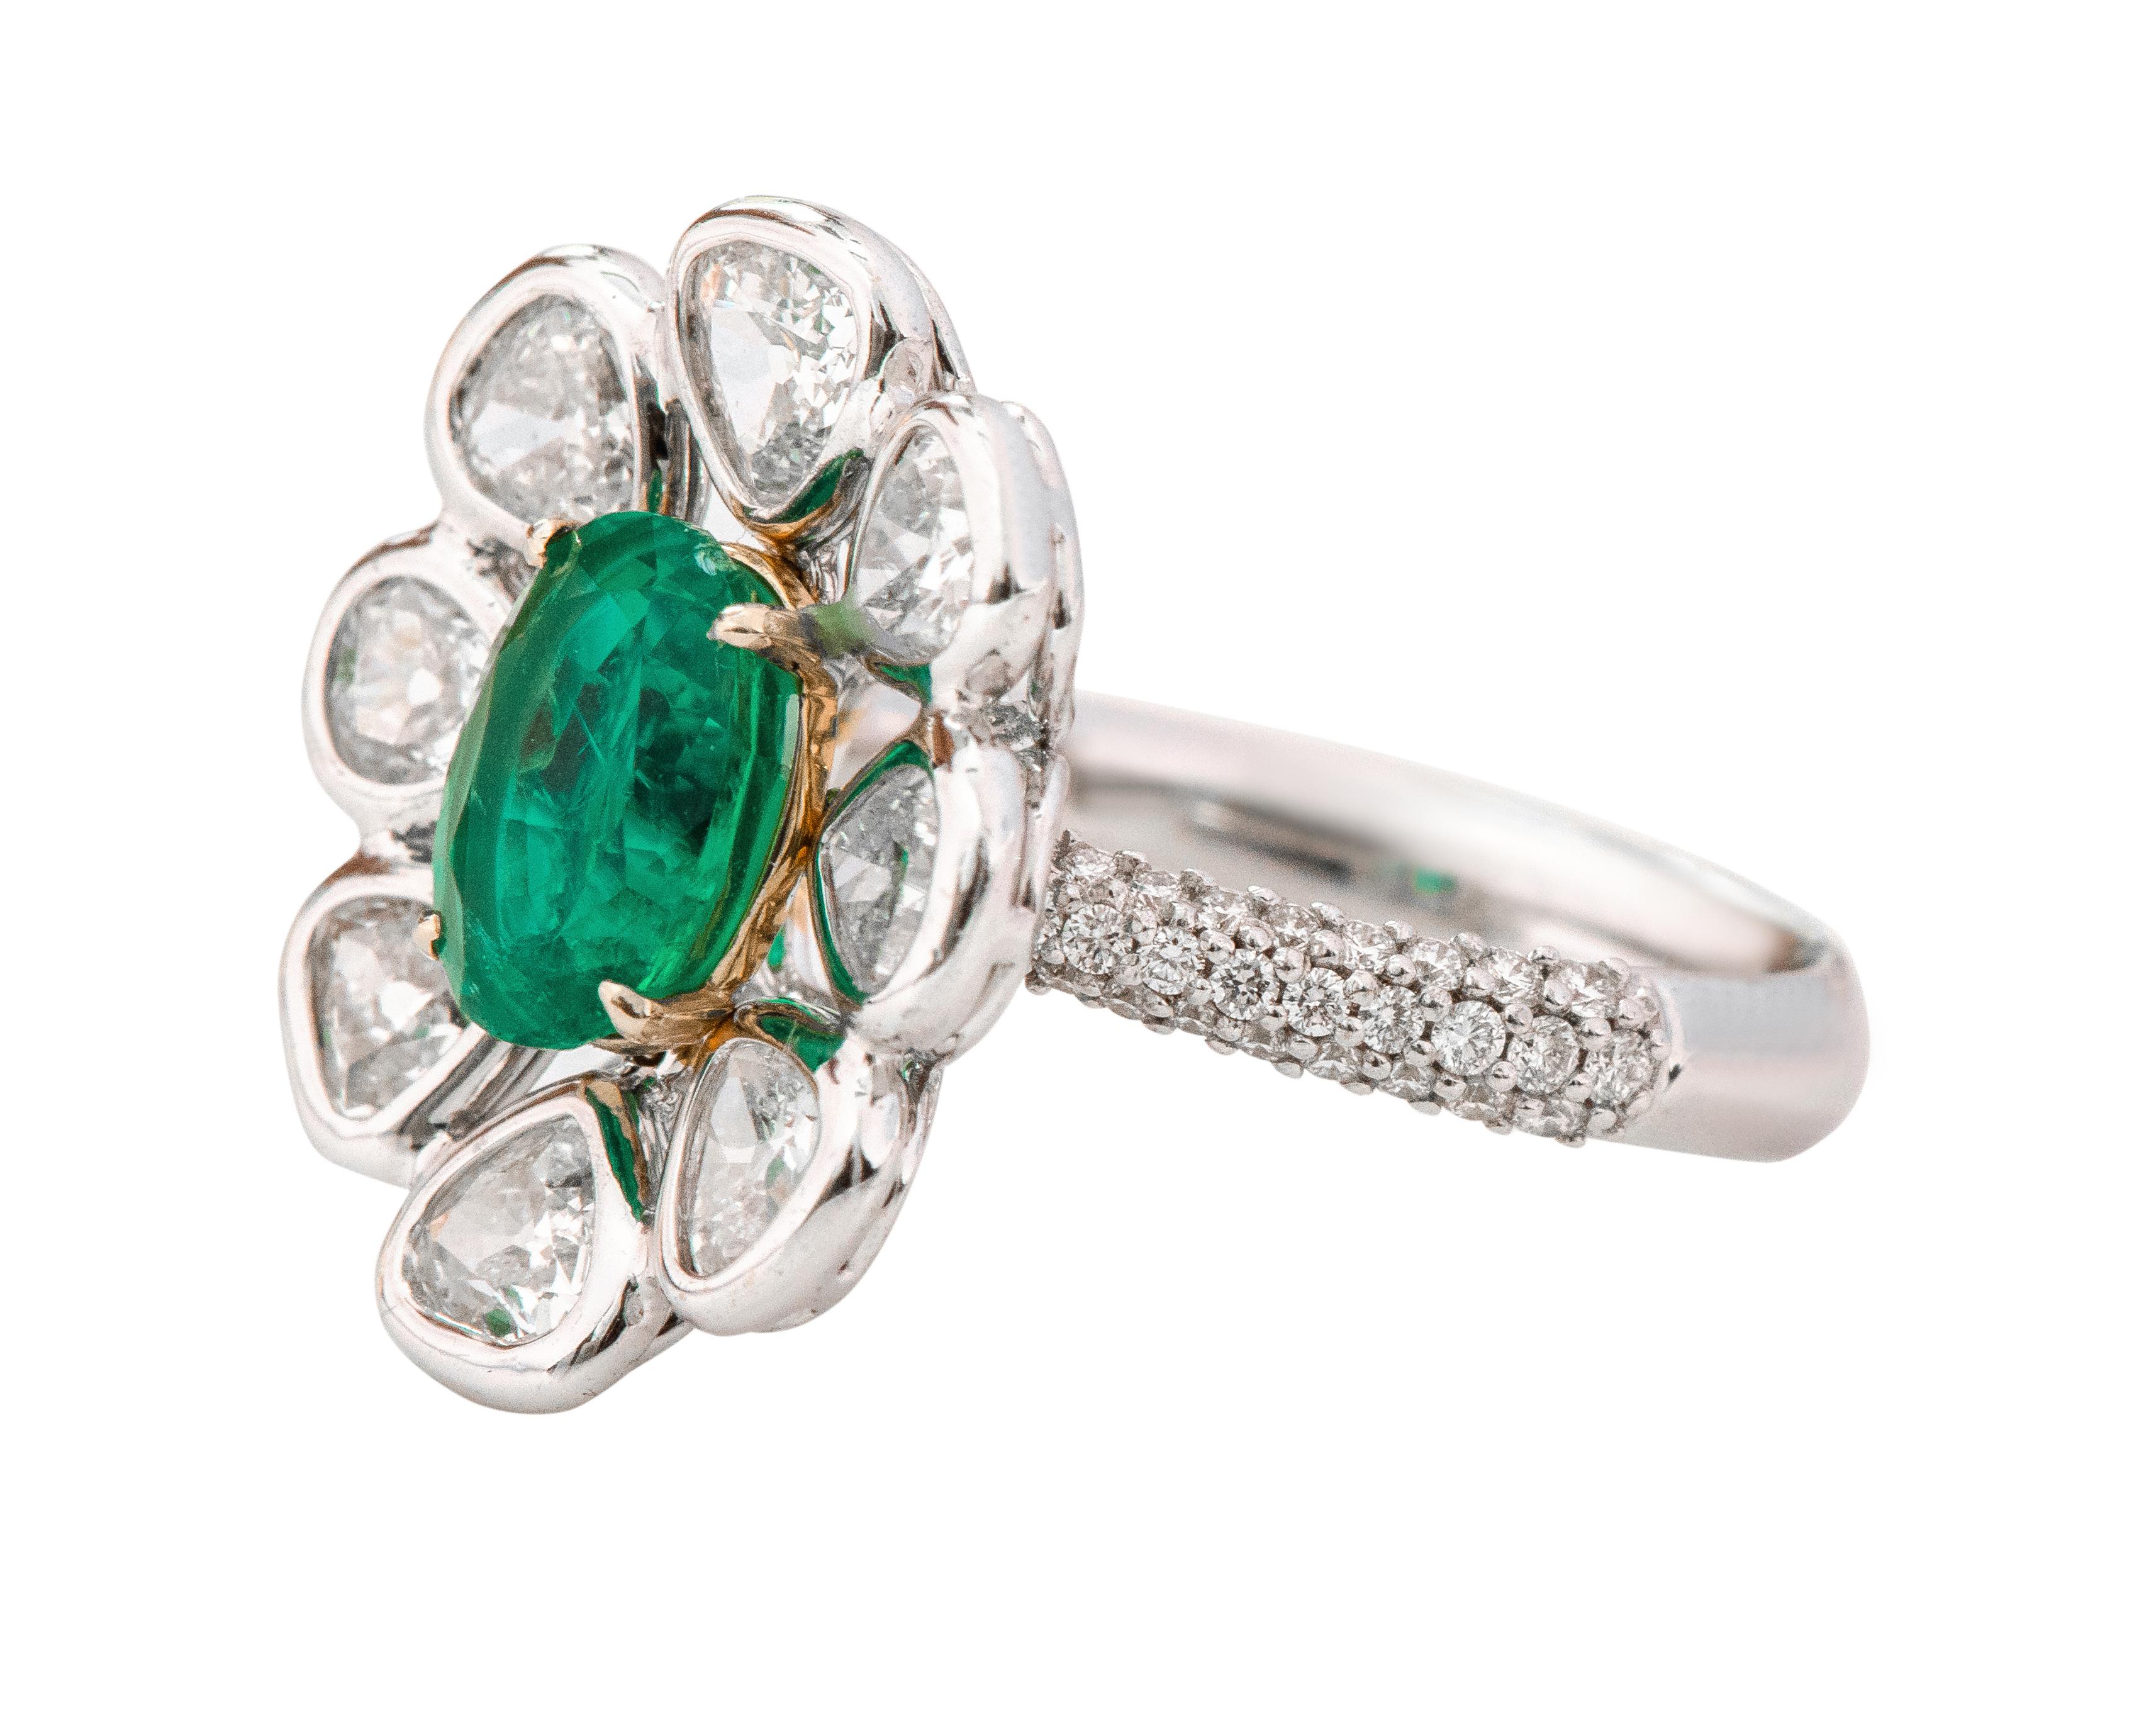 18 Karat White Gold 1.80 Carat Natural Emerald and Diamond Masterpiece Ring

This magnificent vivid green emerald and diamond solitaire ring is sensational. The solitaire emerald oval in yellow gold eagle prong setting is heightened by the